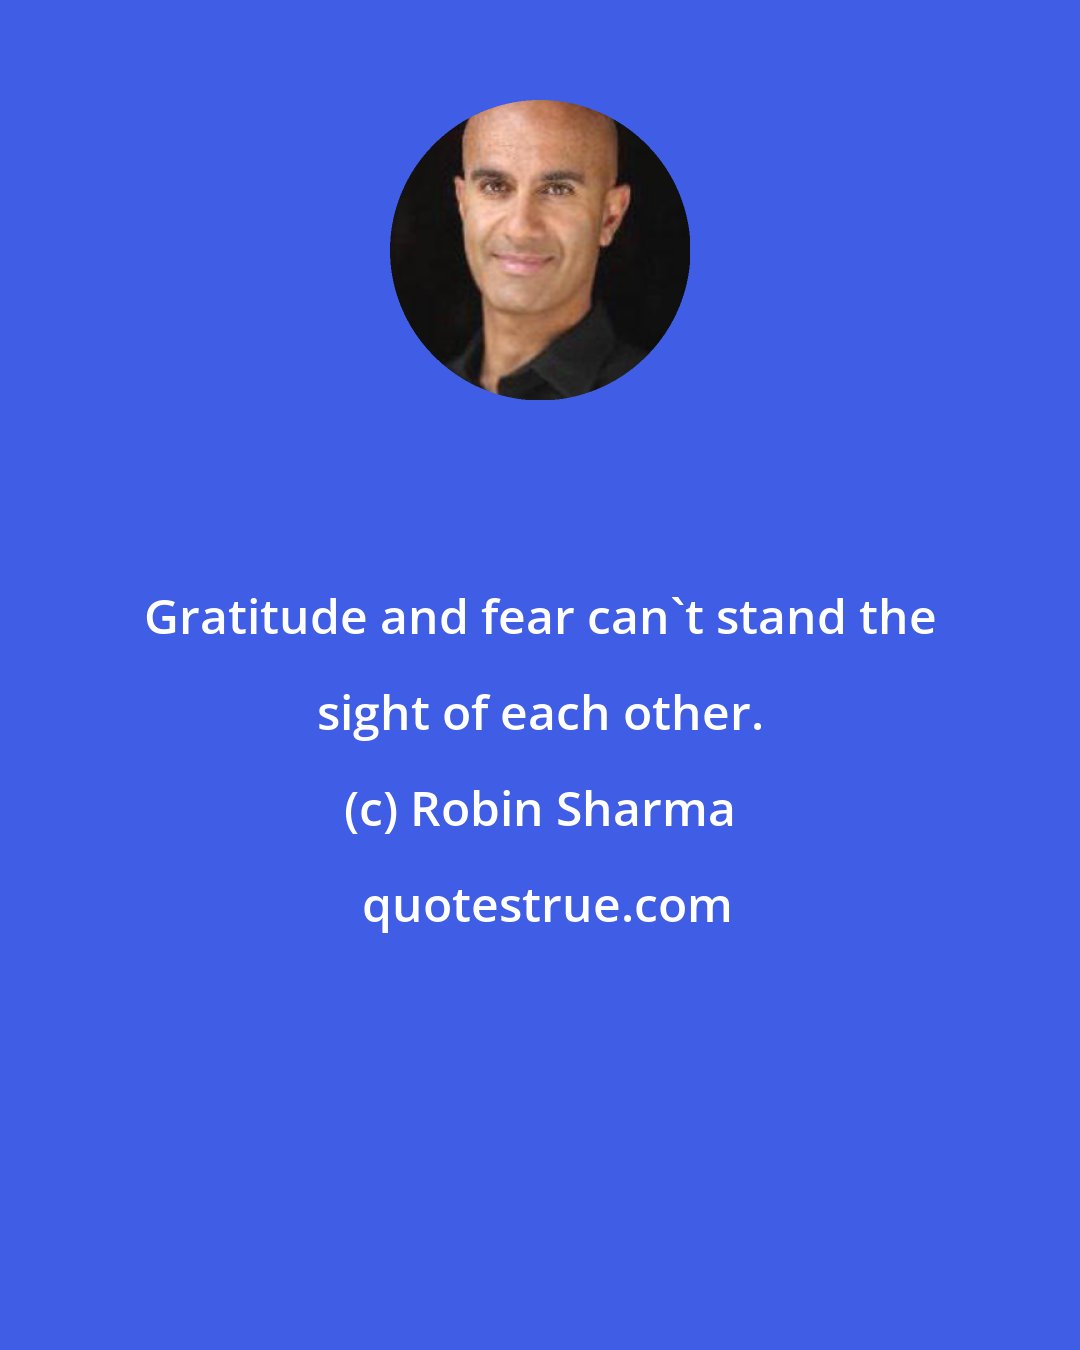 Robin Sharma: Gratitude and fear can't stand the sight of each other.